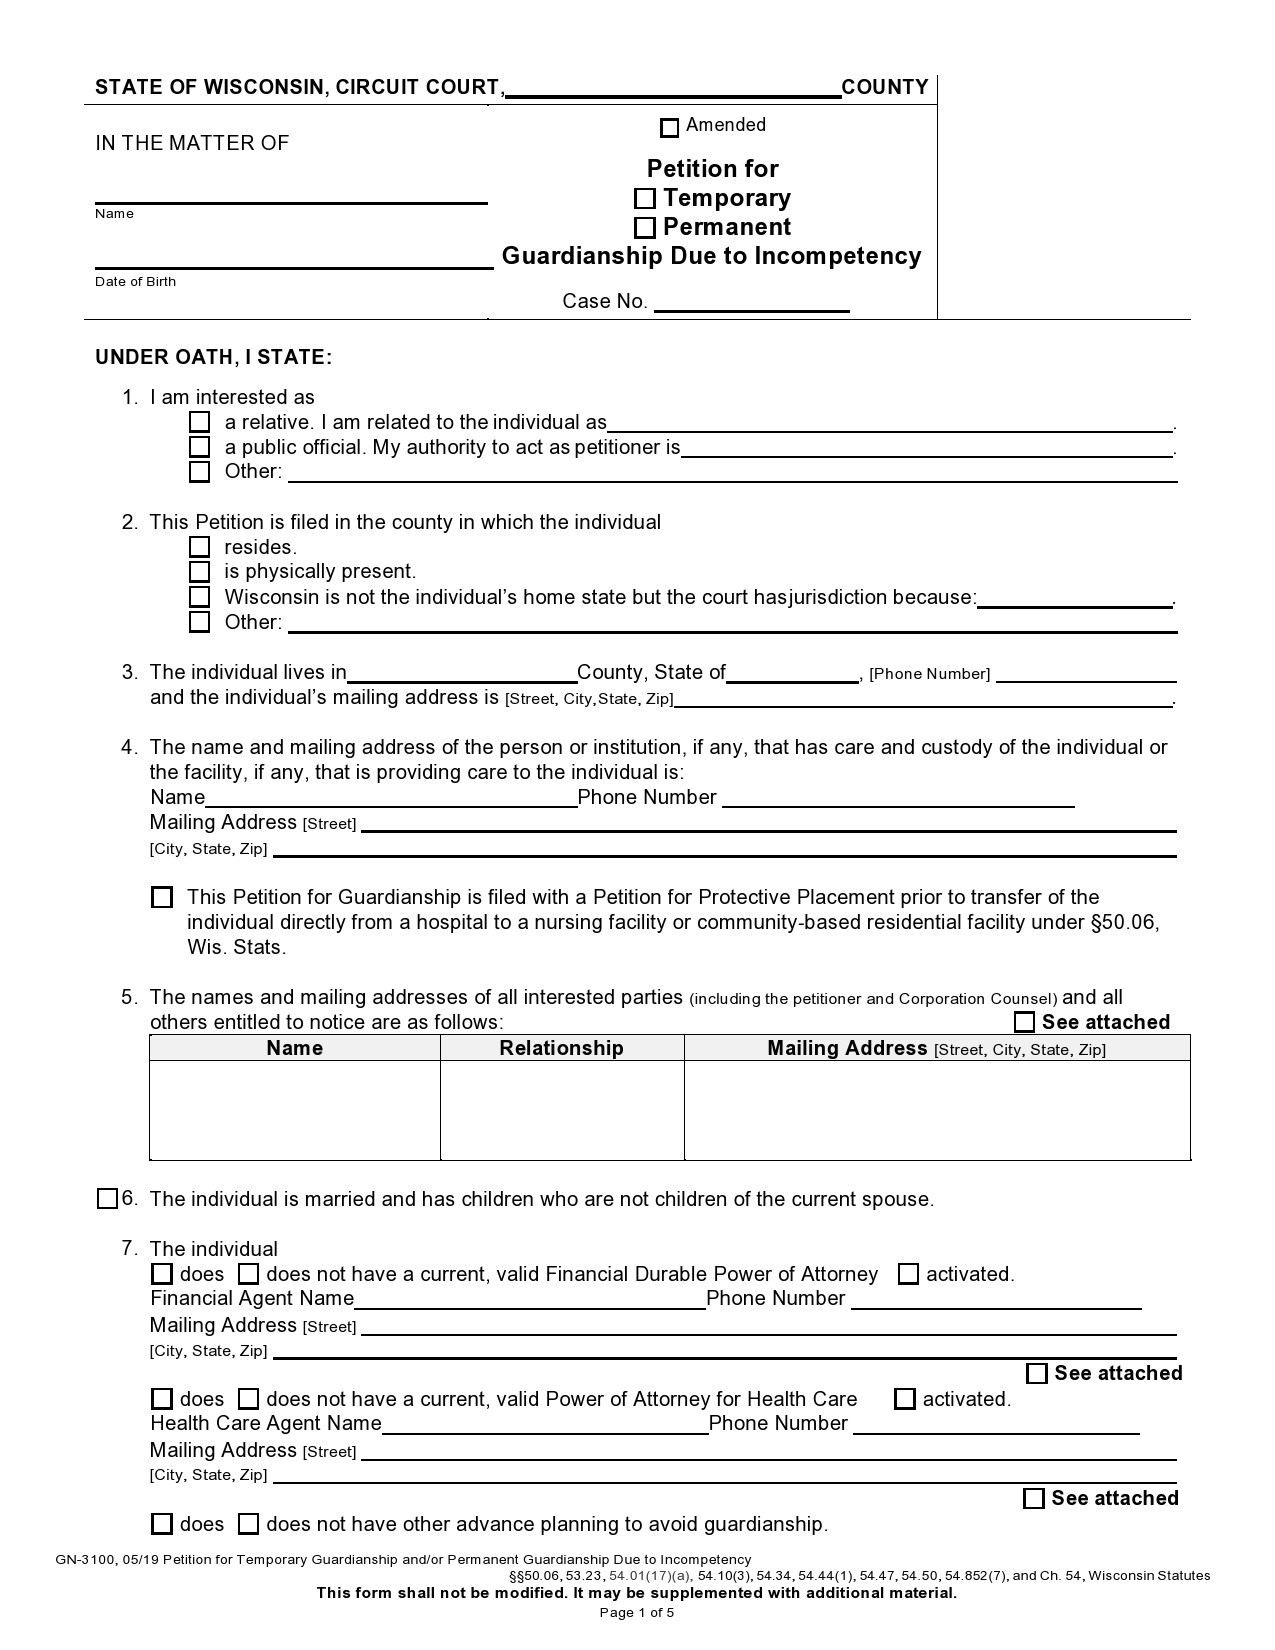 40-printable-temporary-guardianship-forms-all-states-world-news